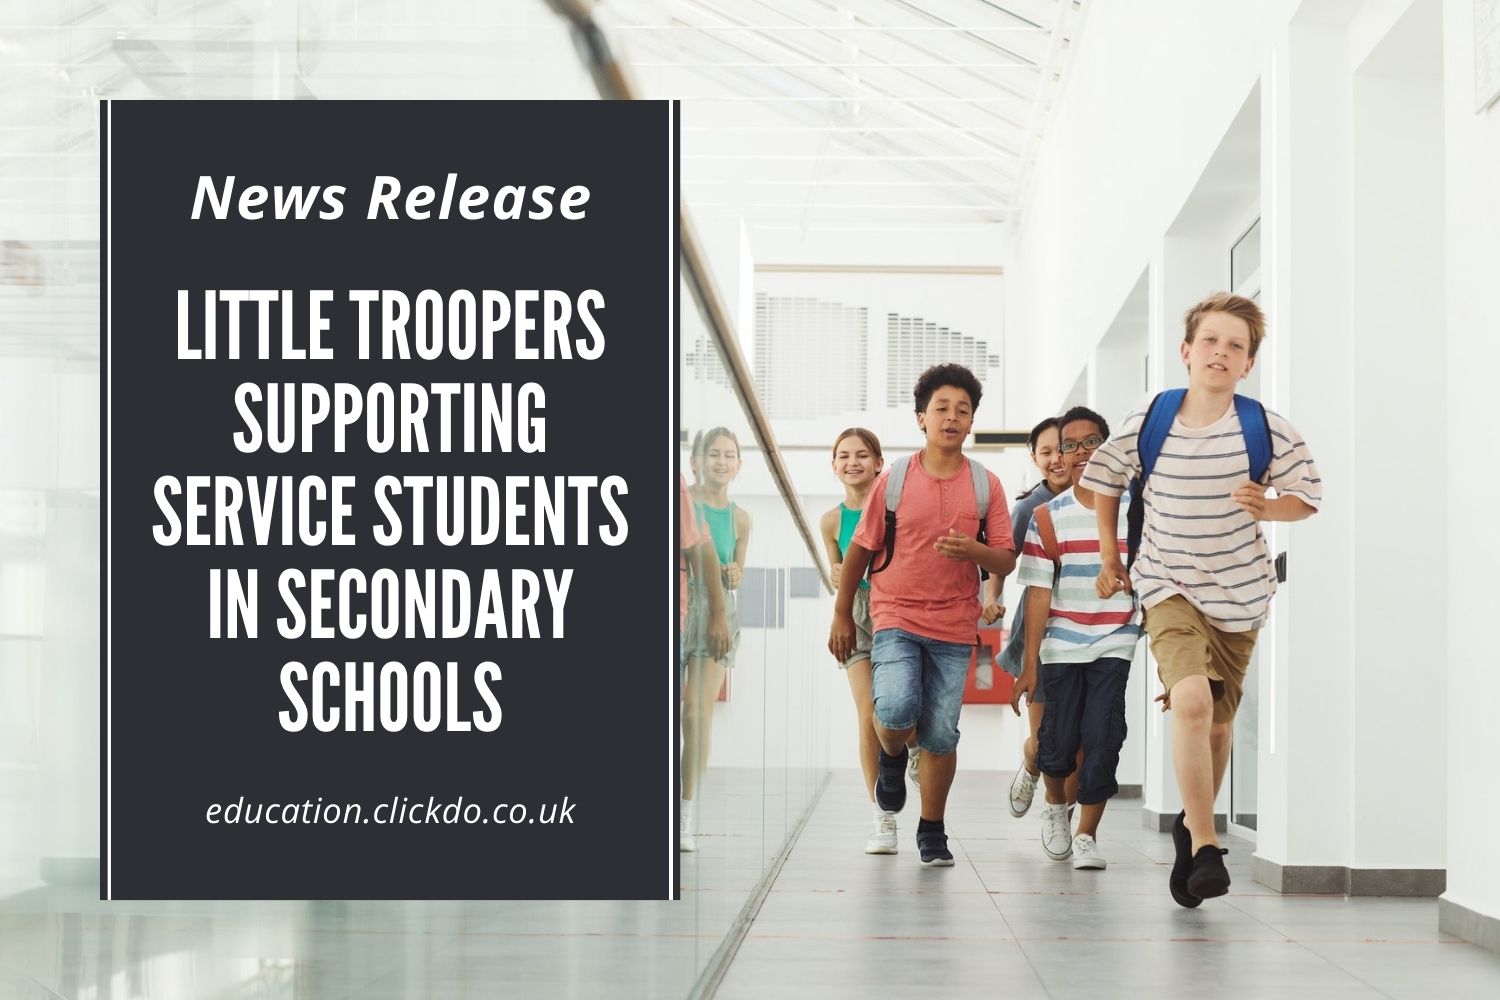 News Release Little Troopers Supporting Service Students in Secondary Schools